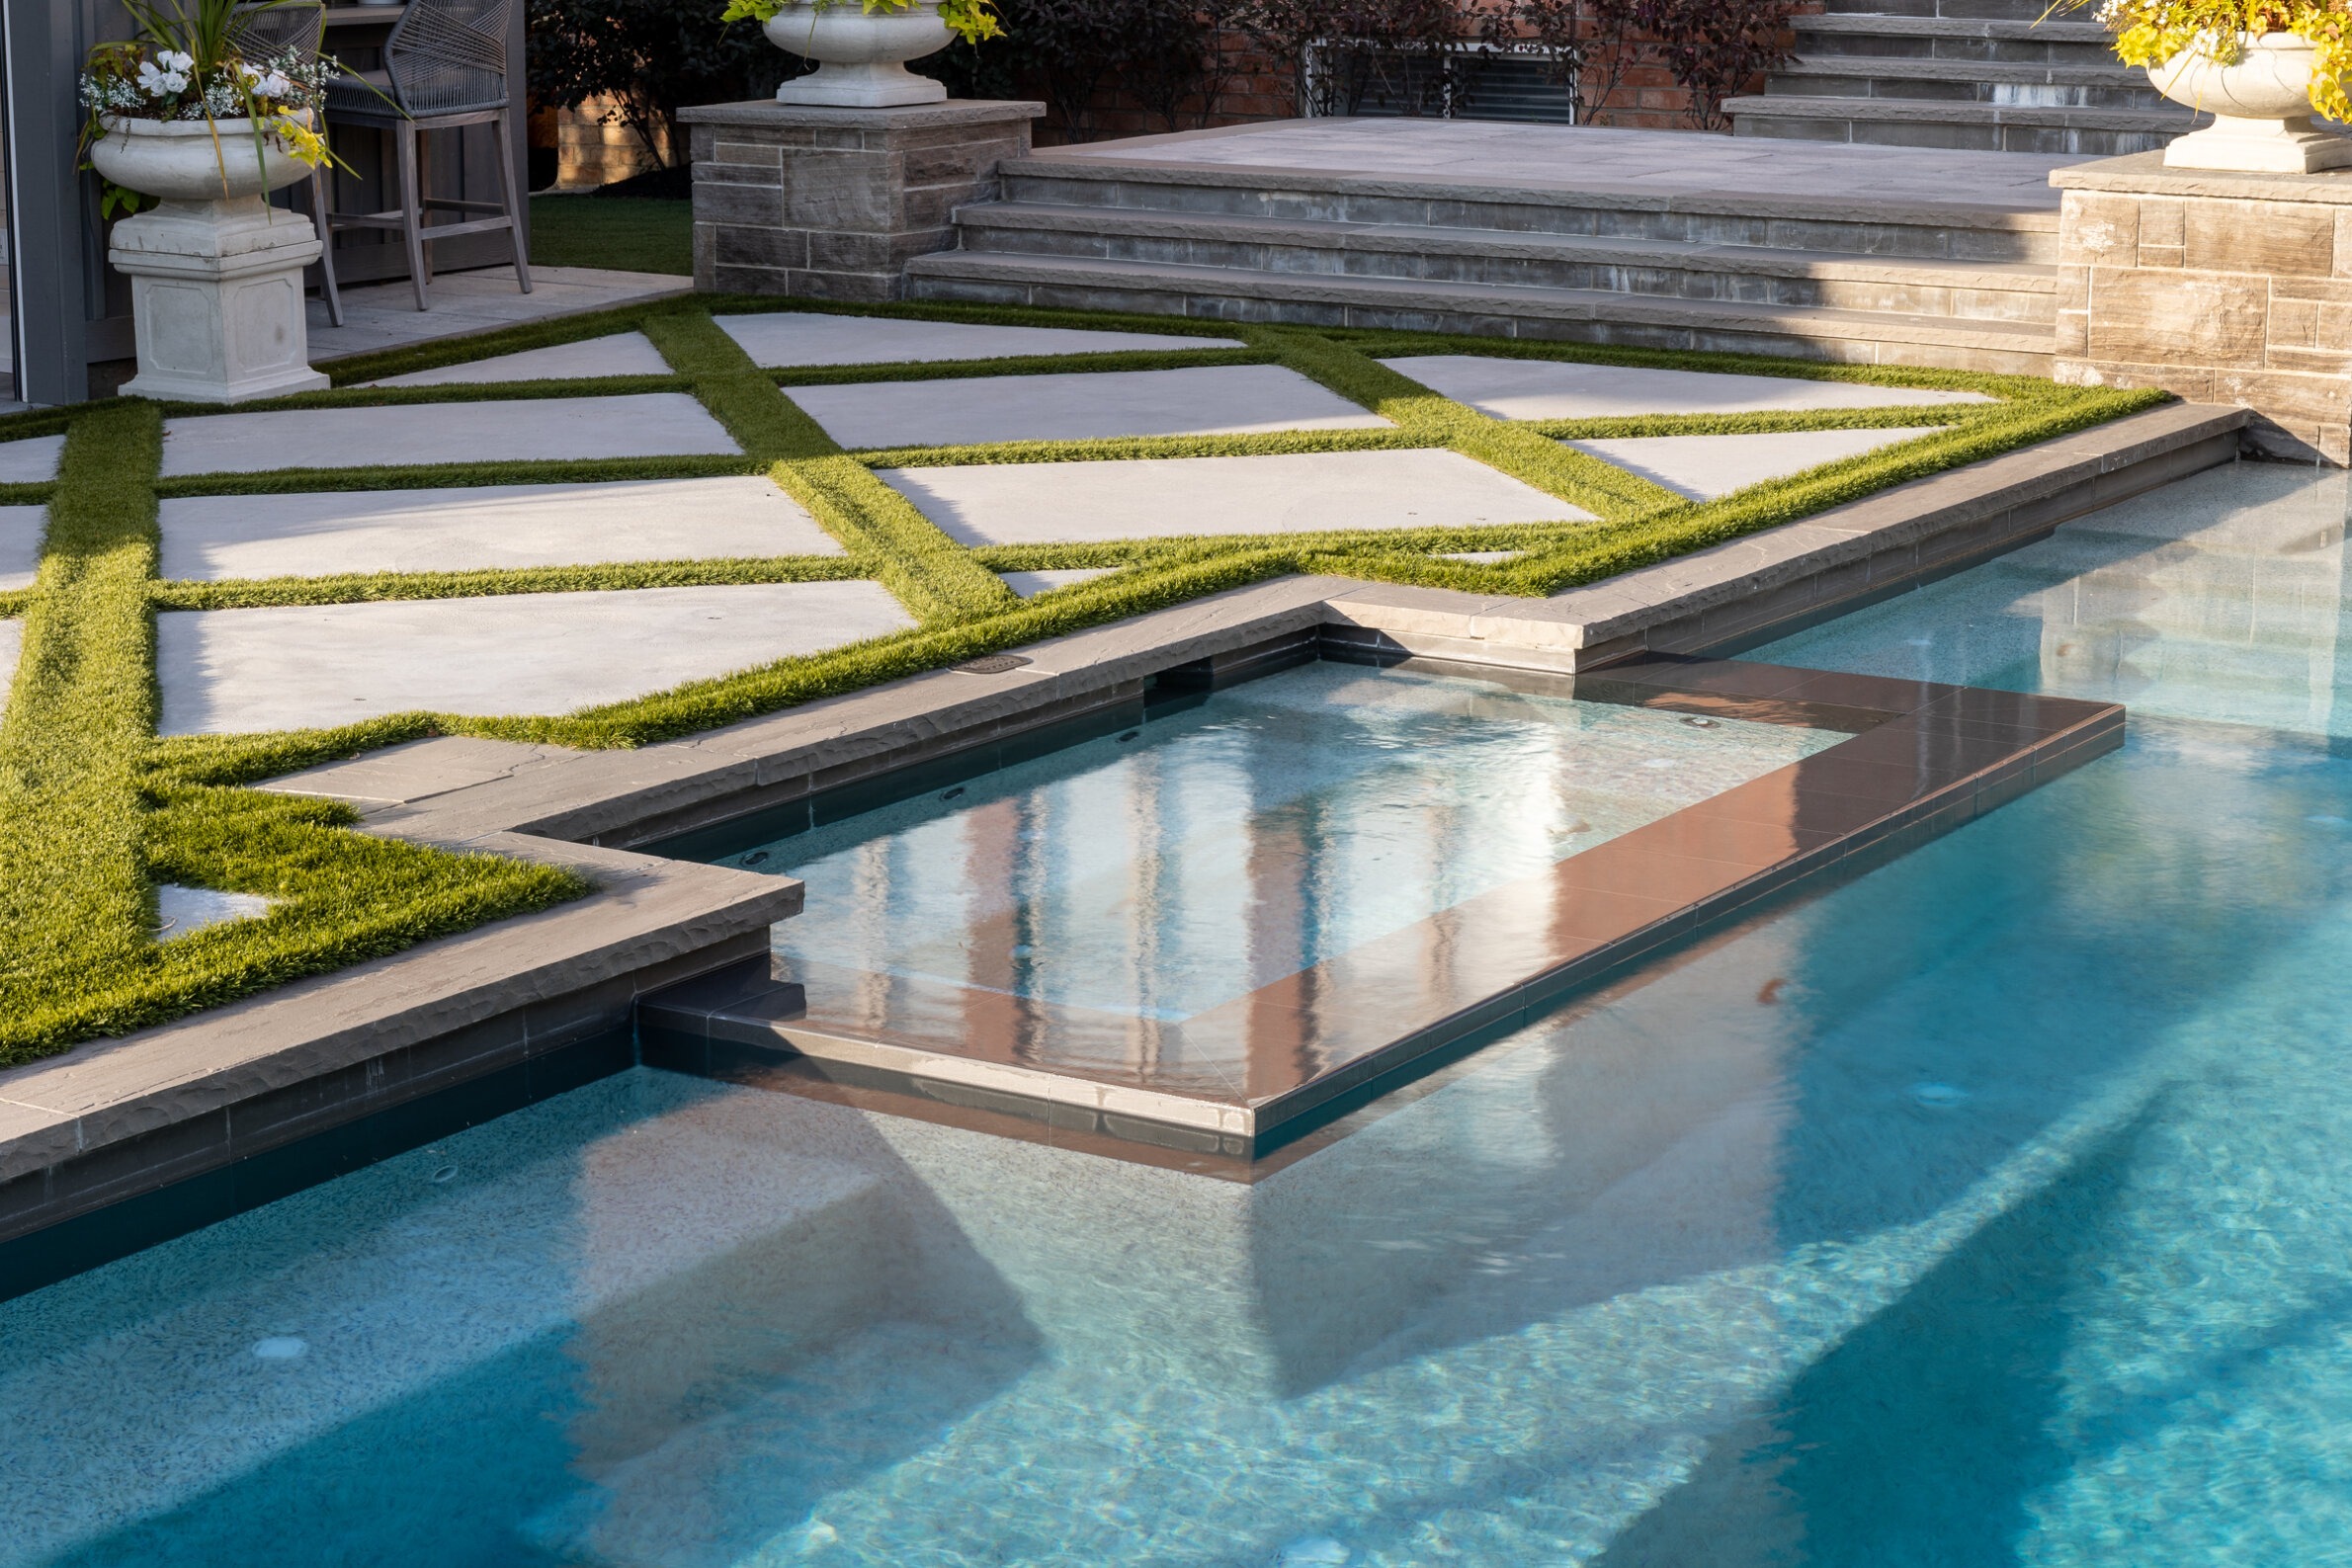 An elegant swimming pool with geometric stepping stones surrounded by manicured grass and large stone stairs, reflecting a clear blue sky.